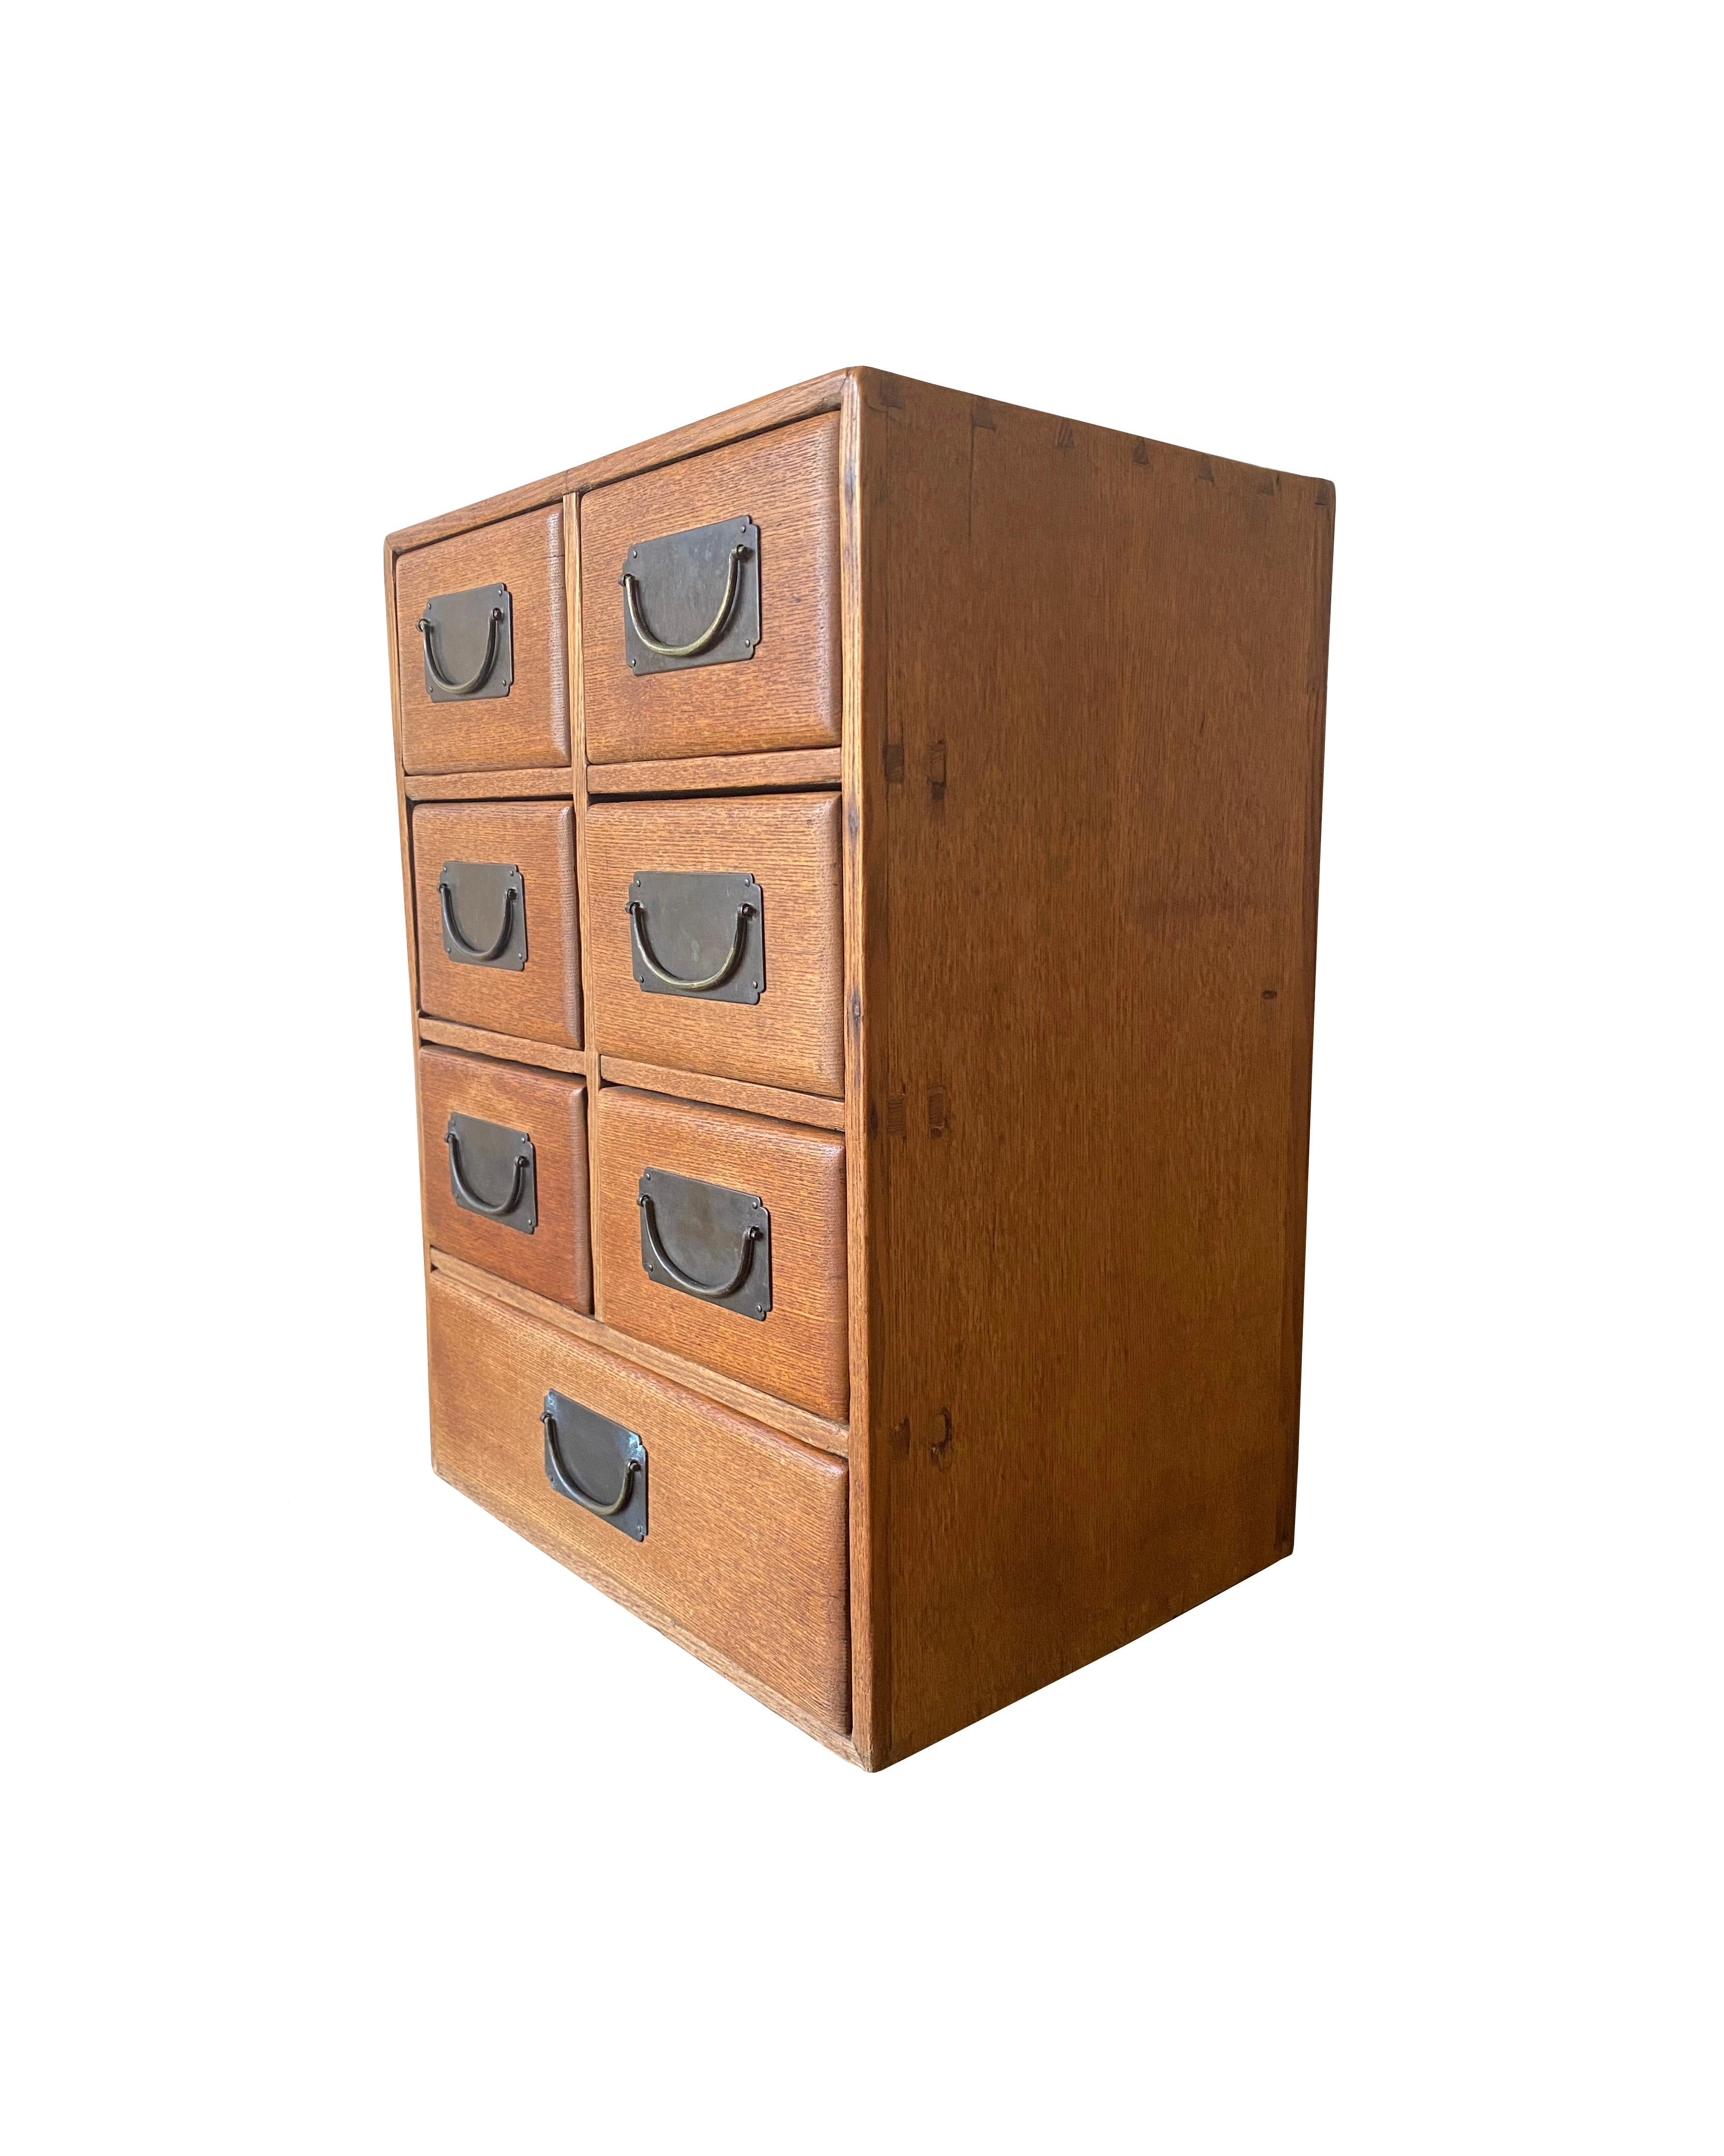 An early 20th century Elm wood lacquered Chinese cabinet featuring original fittings. This cabinet features a simple yet elegant shape and 7 drawers (6 smaller and 1 larger full width drawer at its base). There are some markings and scratches on the